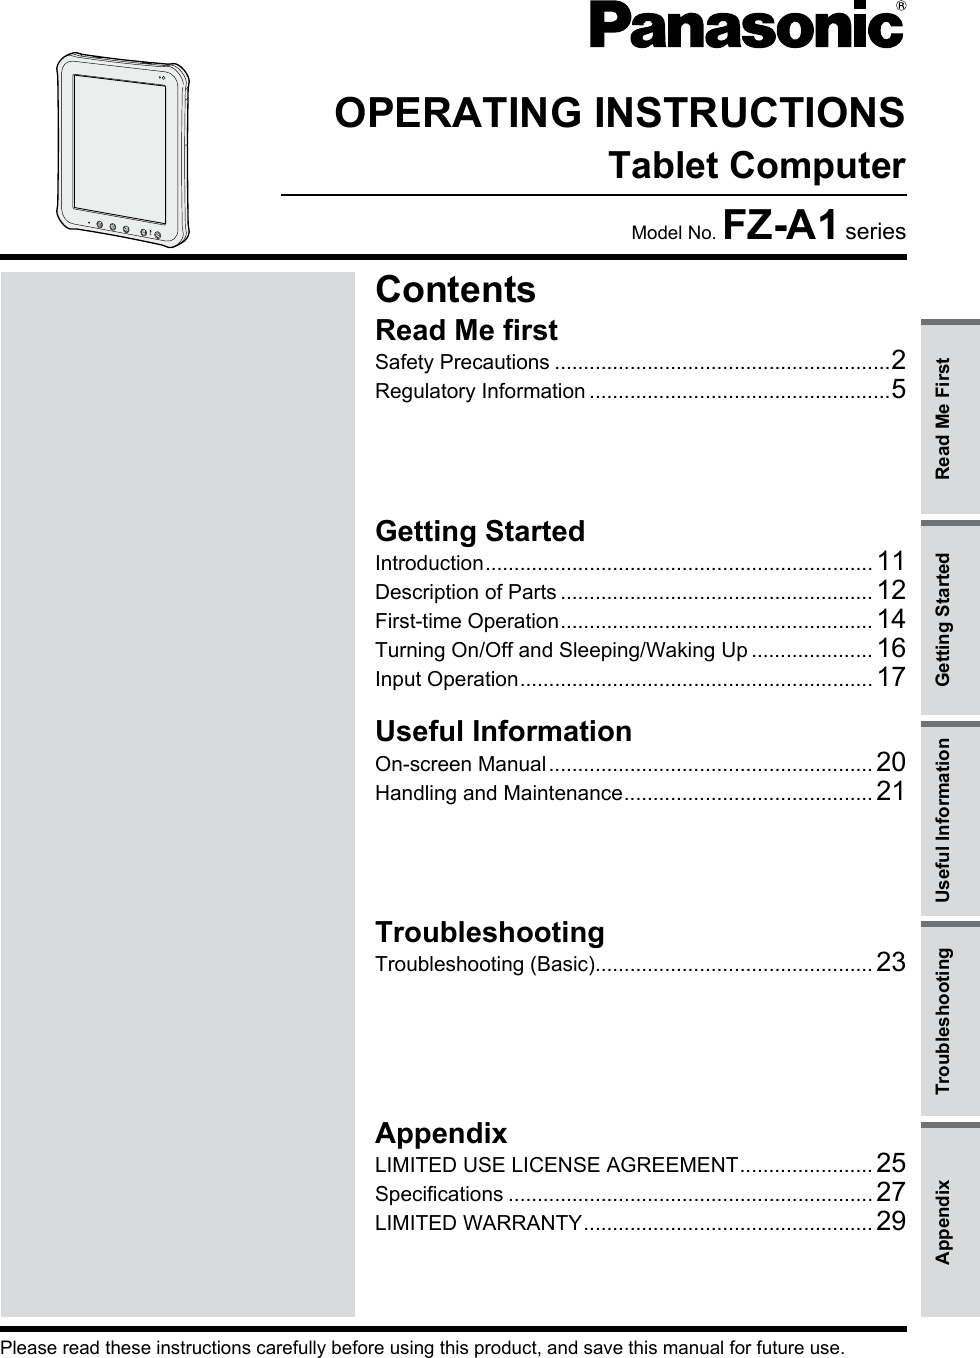 OPERATING INSTRUCTIONSTablet ComputerModel No. FZ-A1 seriesPlease read these instructions carefully before using this product, and save this manual for future use.AppendixLIMITED USE LICENSE AGREEMENT ....................... 25Specifications ............................................................... 27LIMITED WARRANTY .................................................. 29TroubleshootingTroubleshooting (Basic)................................................ 23Useful InformationOn-screen Manual ........................................................ 20Handling and Maintenance ........................................... 21Getting StartedIntroduction ................................................................... 11Description of Parts ...................................................... 12First-time Operation ...................................................... 14Turning On/Off and Sleeping/Waking Up ..................... 16Input Operation ............................................................. 17Read Me firstSafety Precautions ..........................................................2Regulatory Information ....................................................5ContentsRead Me FirstGetting StartedUseful InformationTroubleshootingAppendix